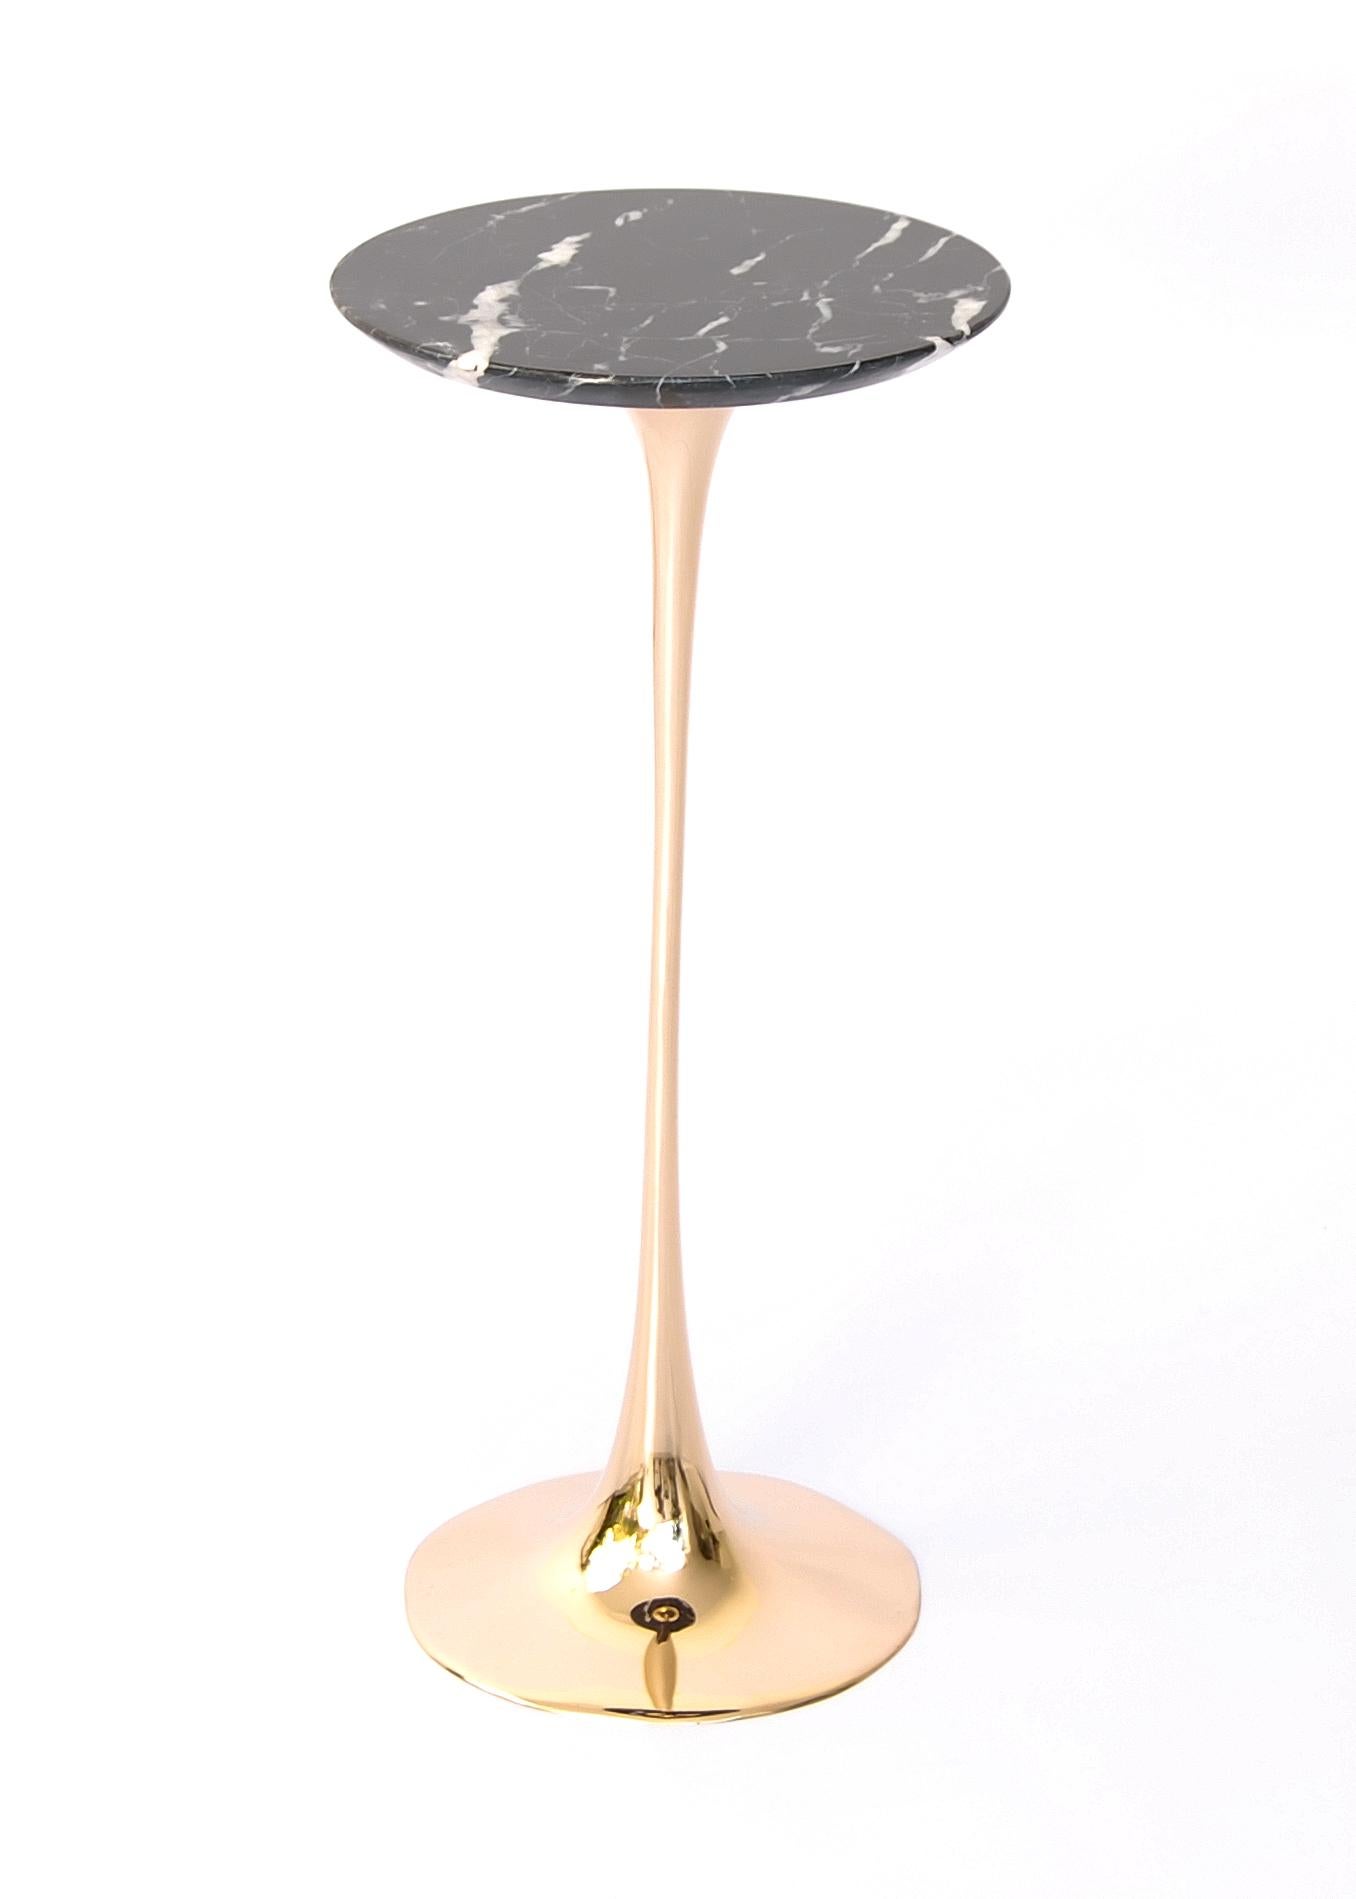 Apple drink table with Nero Marquina Marble top by Fakasaka Design
Dimensions: W 30 cm, D 30 cm, H 61 cm.
Materials: polished bronze base, Nero Marquina marble top.
 
Also available in different table top materials:
Nero Marquina Marble